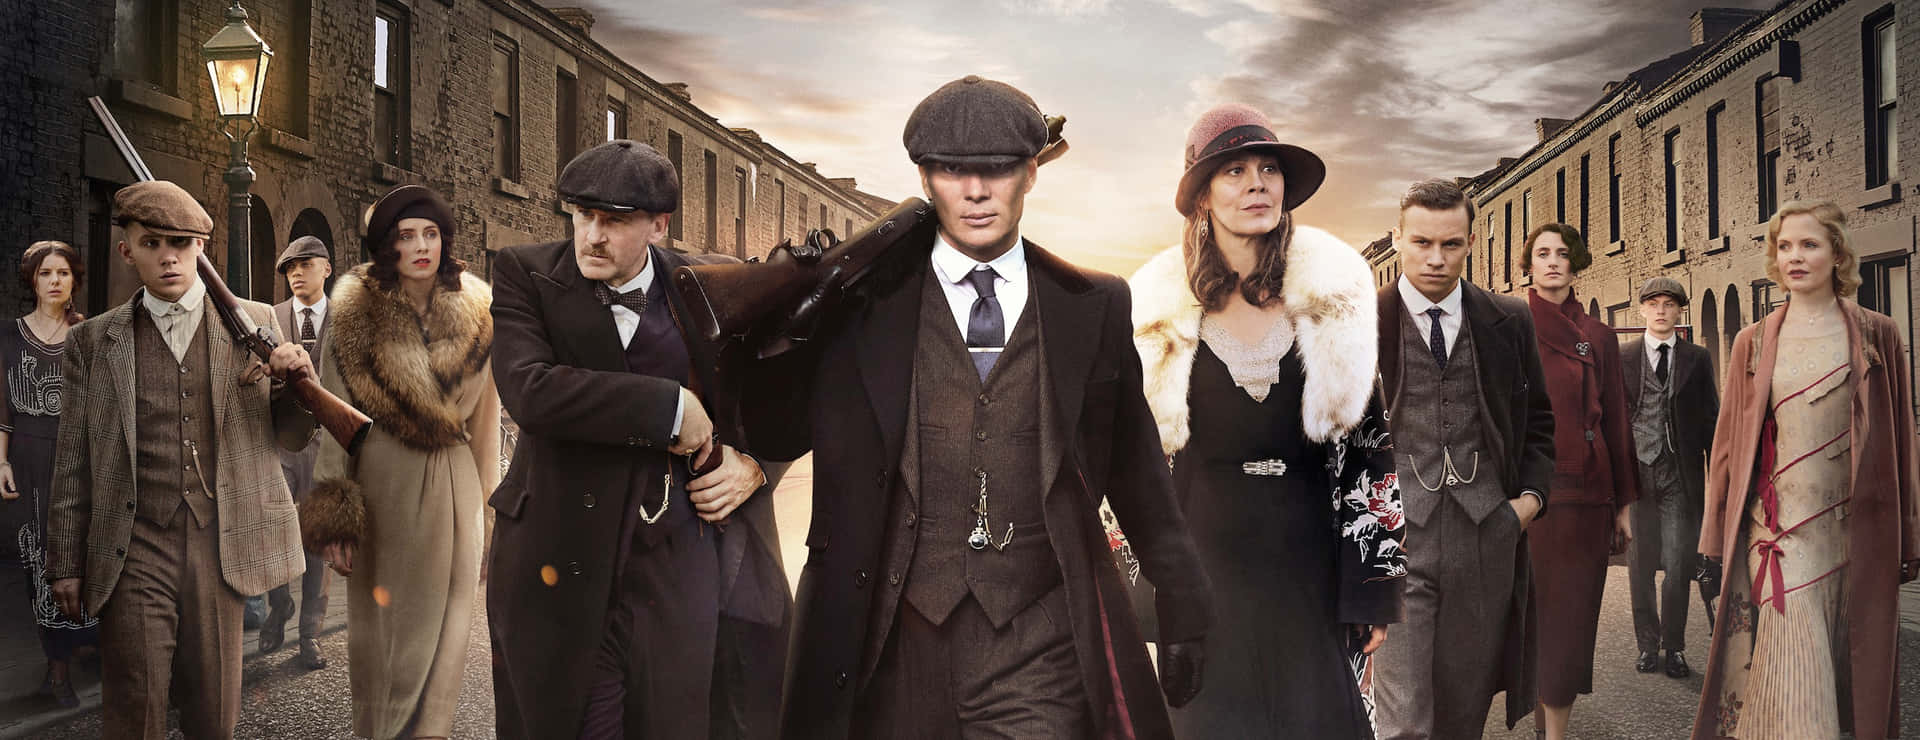 Lead by Thomas Shelby, the Peaky Blinders take the streets of Small Heath